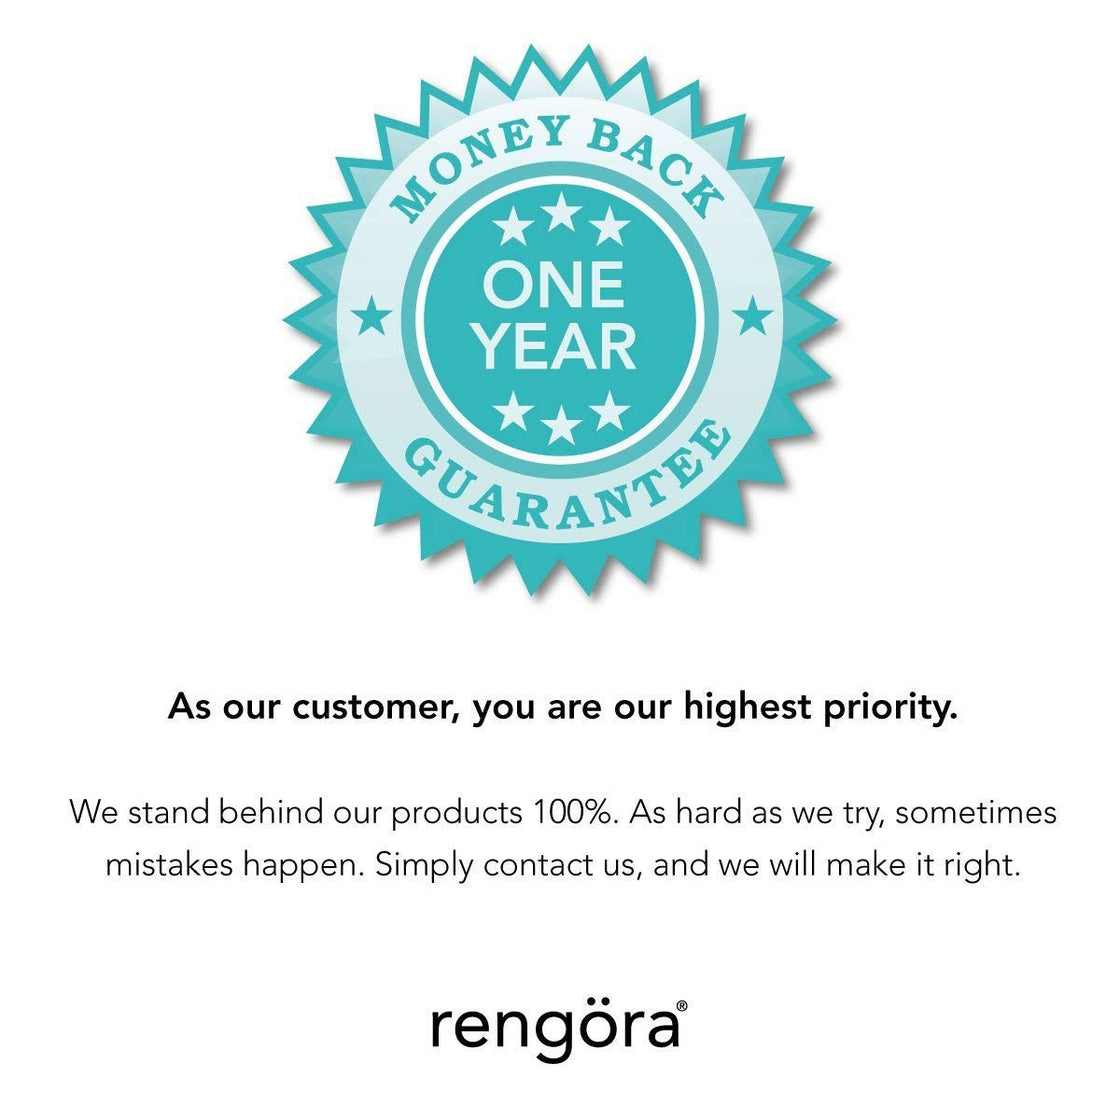 one year money back guarantee image: As our customer, you are our highest priority. We stand behind our products 100%. As hard as we try, sometimes mistakes happen. Simply contact us, and we will make it right.